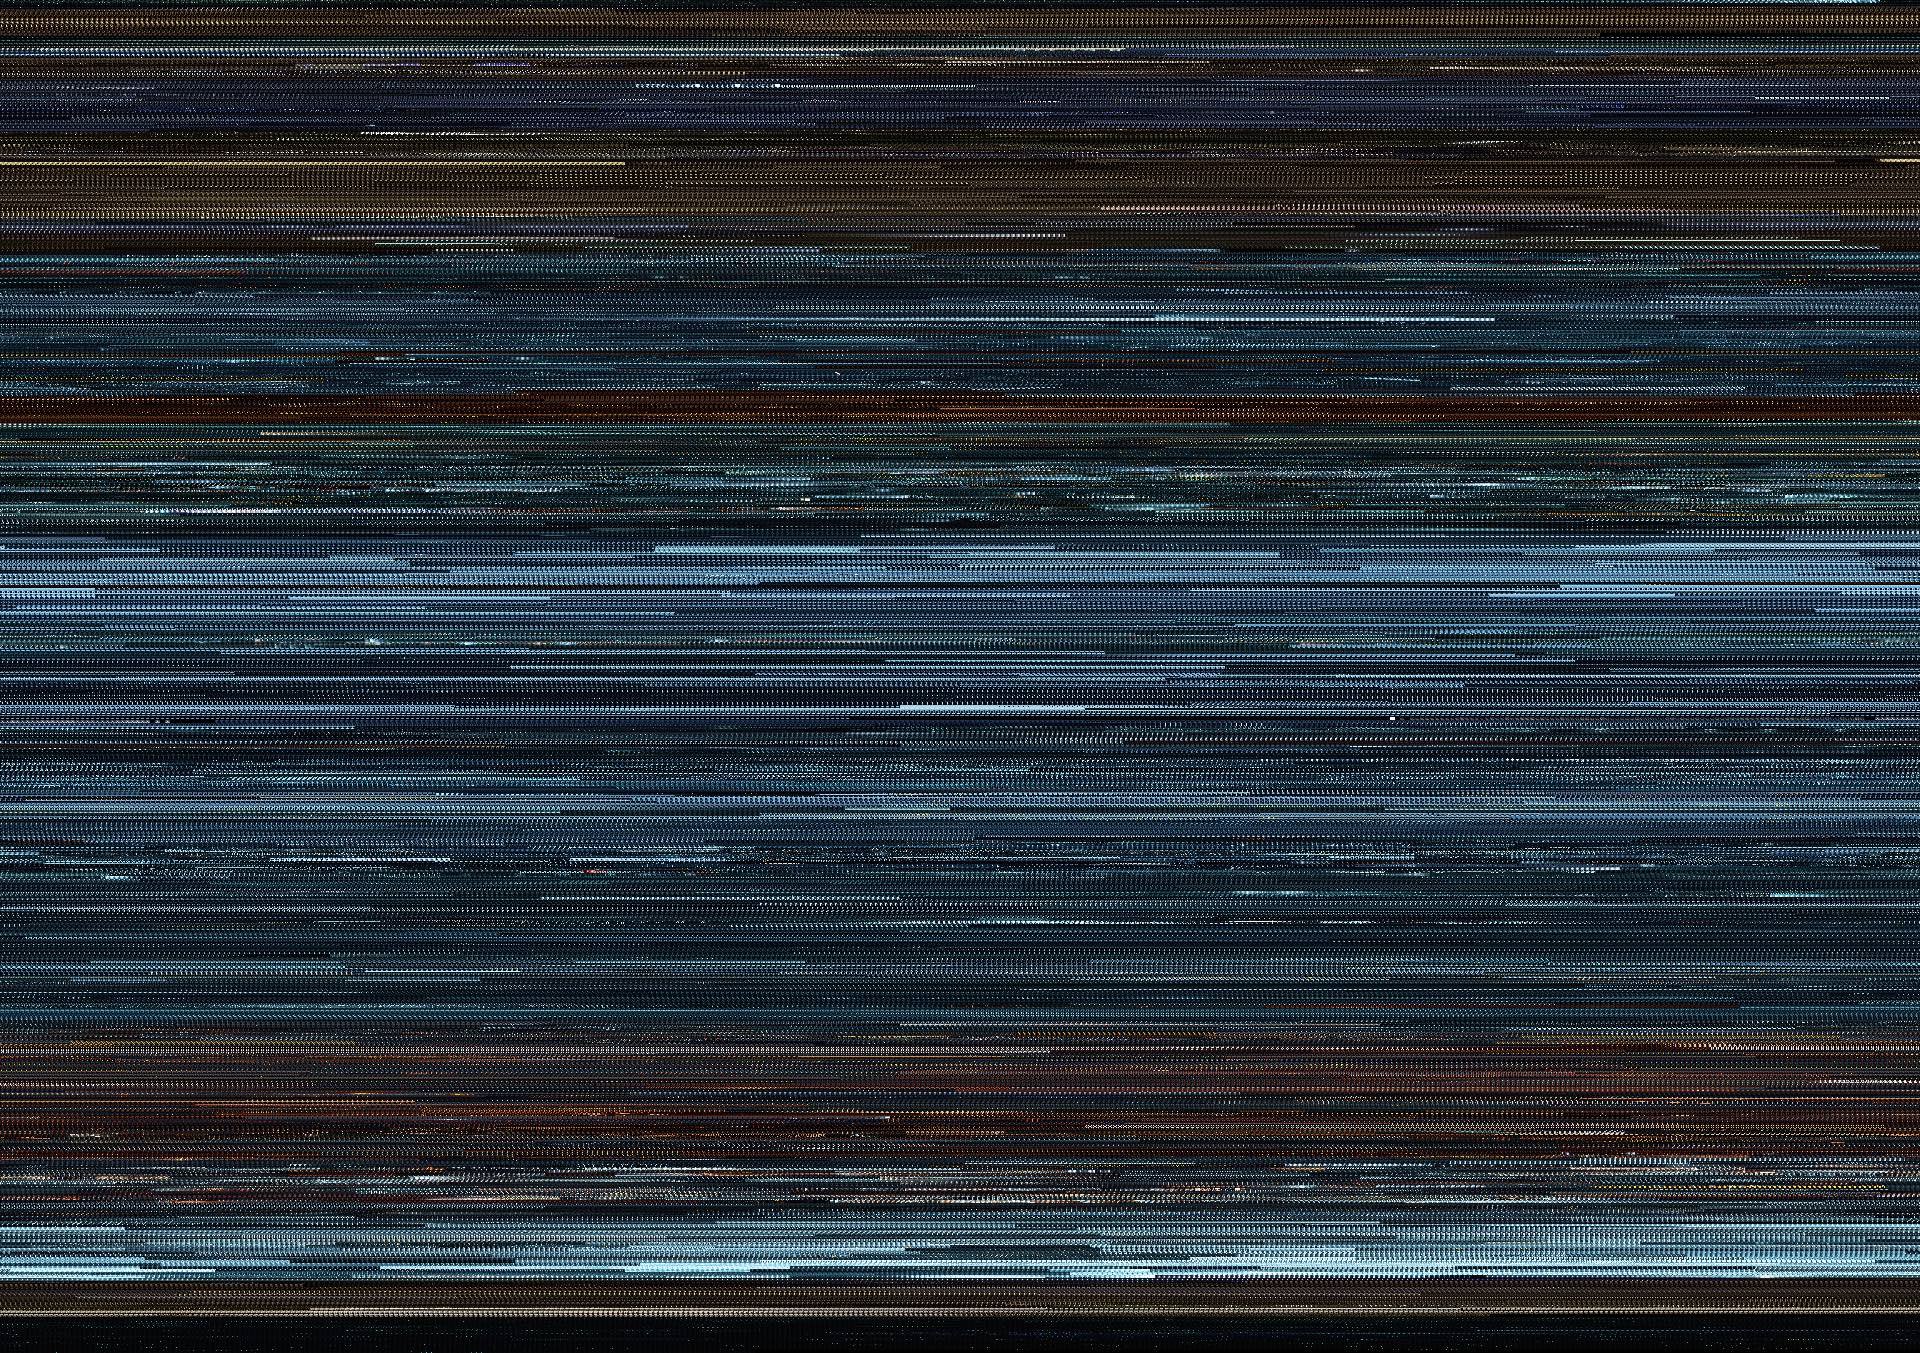 Tron Legacy compressed to single image